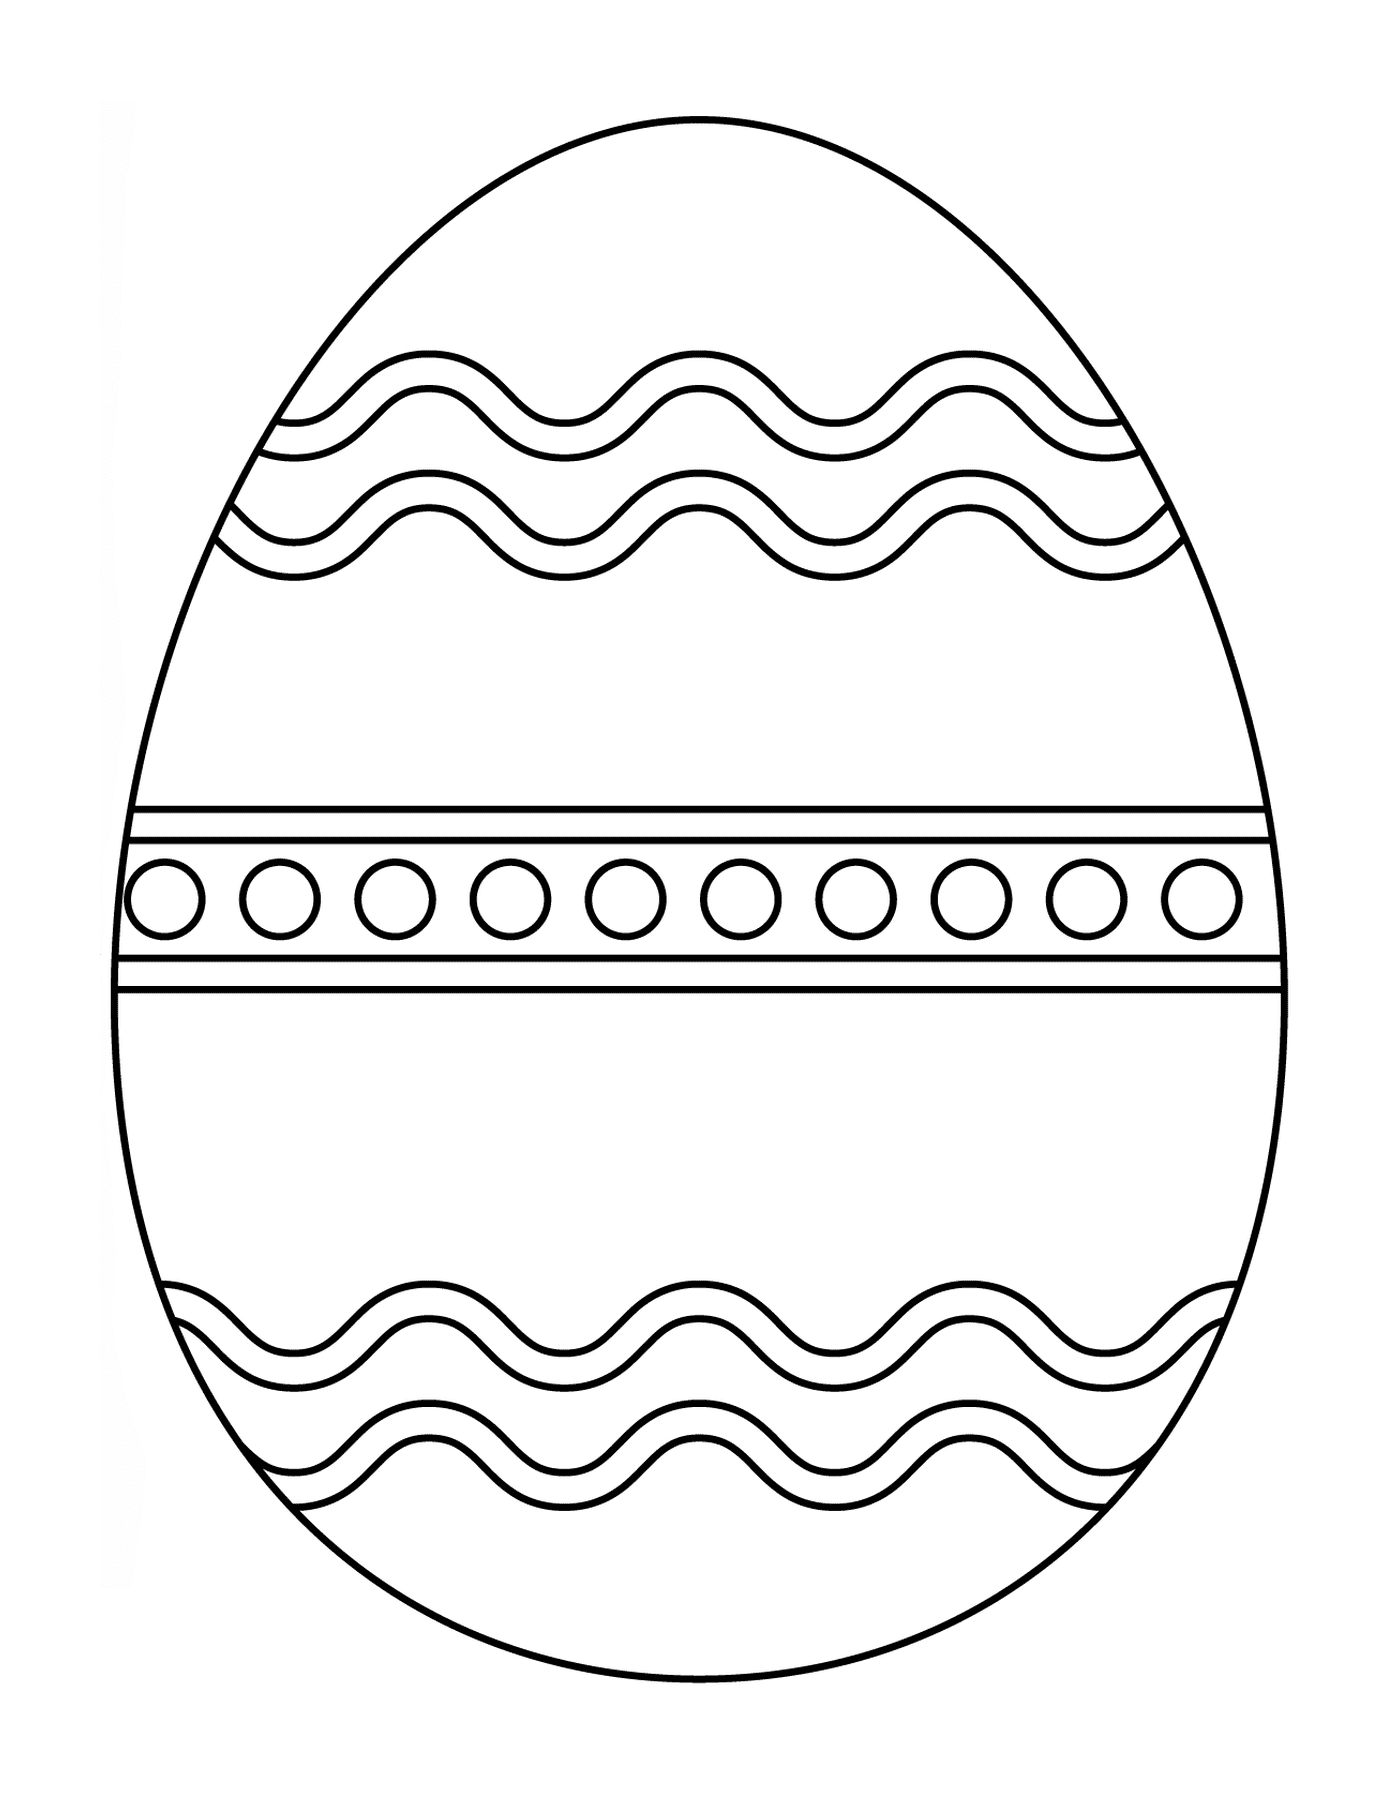  Easter egg with abstract pattern 3 